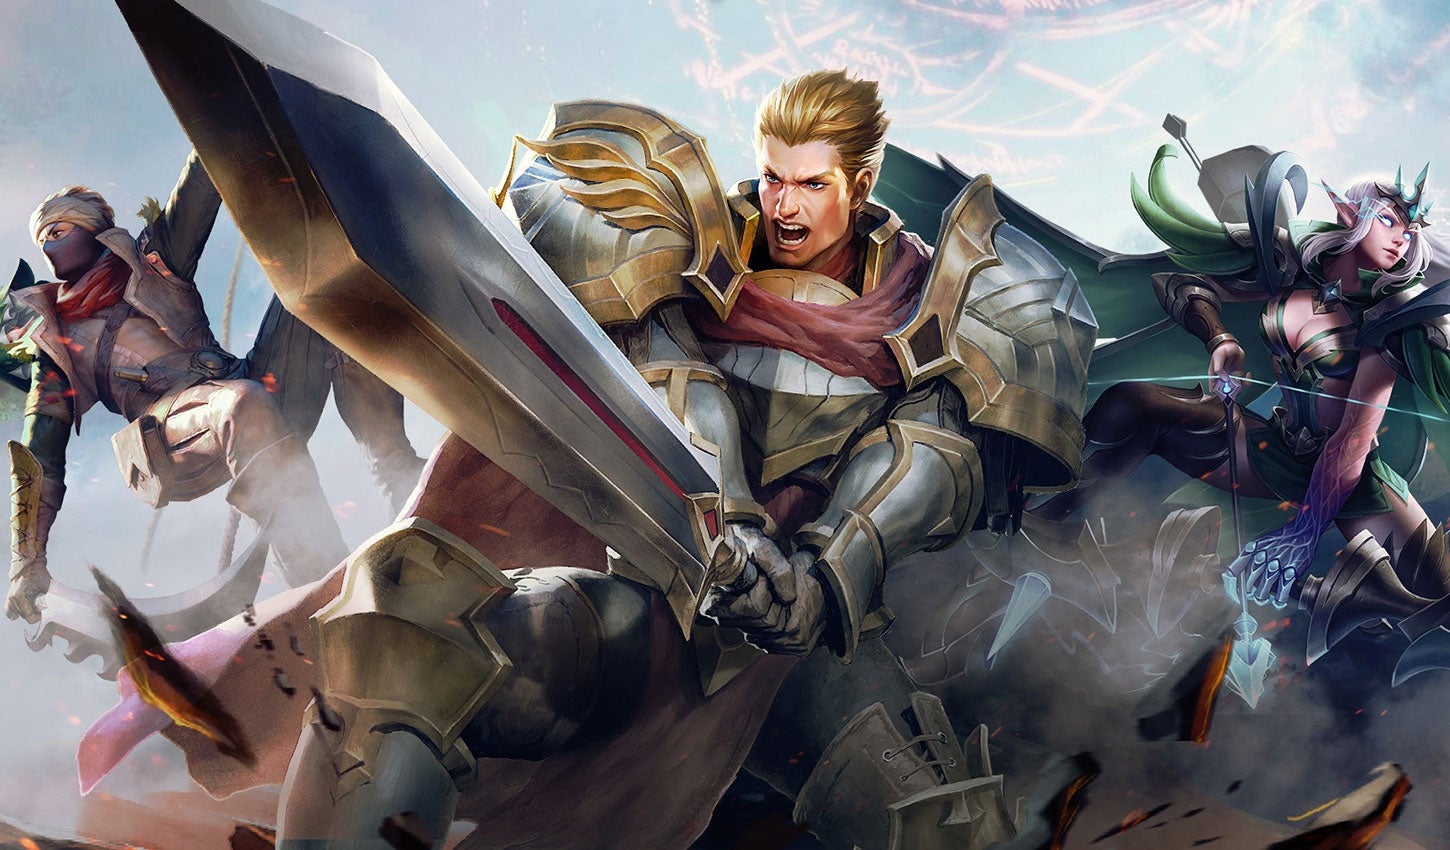 Image for Tencent taking global Honor of Kings as China continues to block its new releases